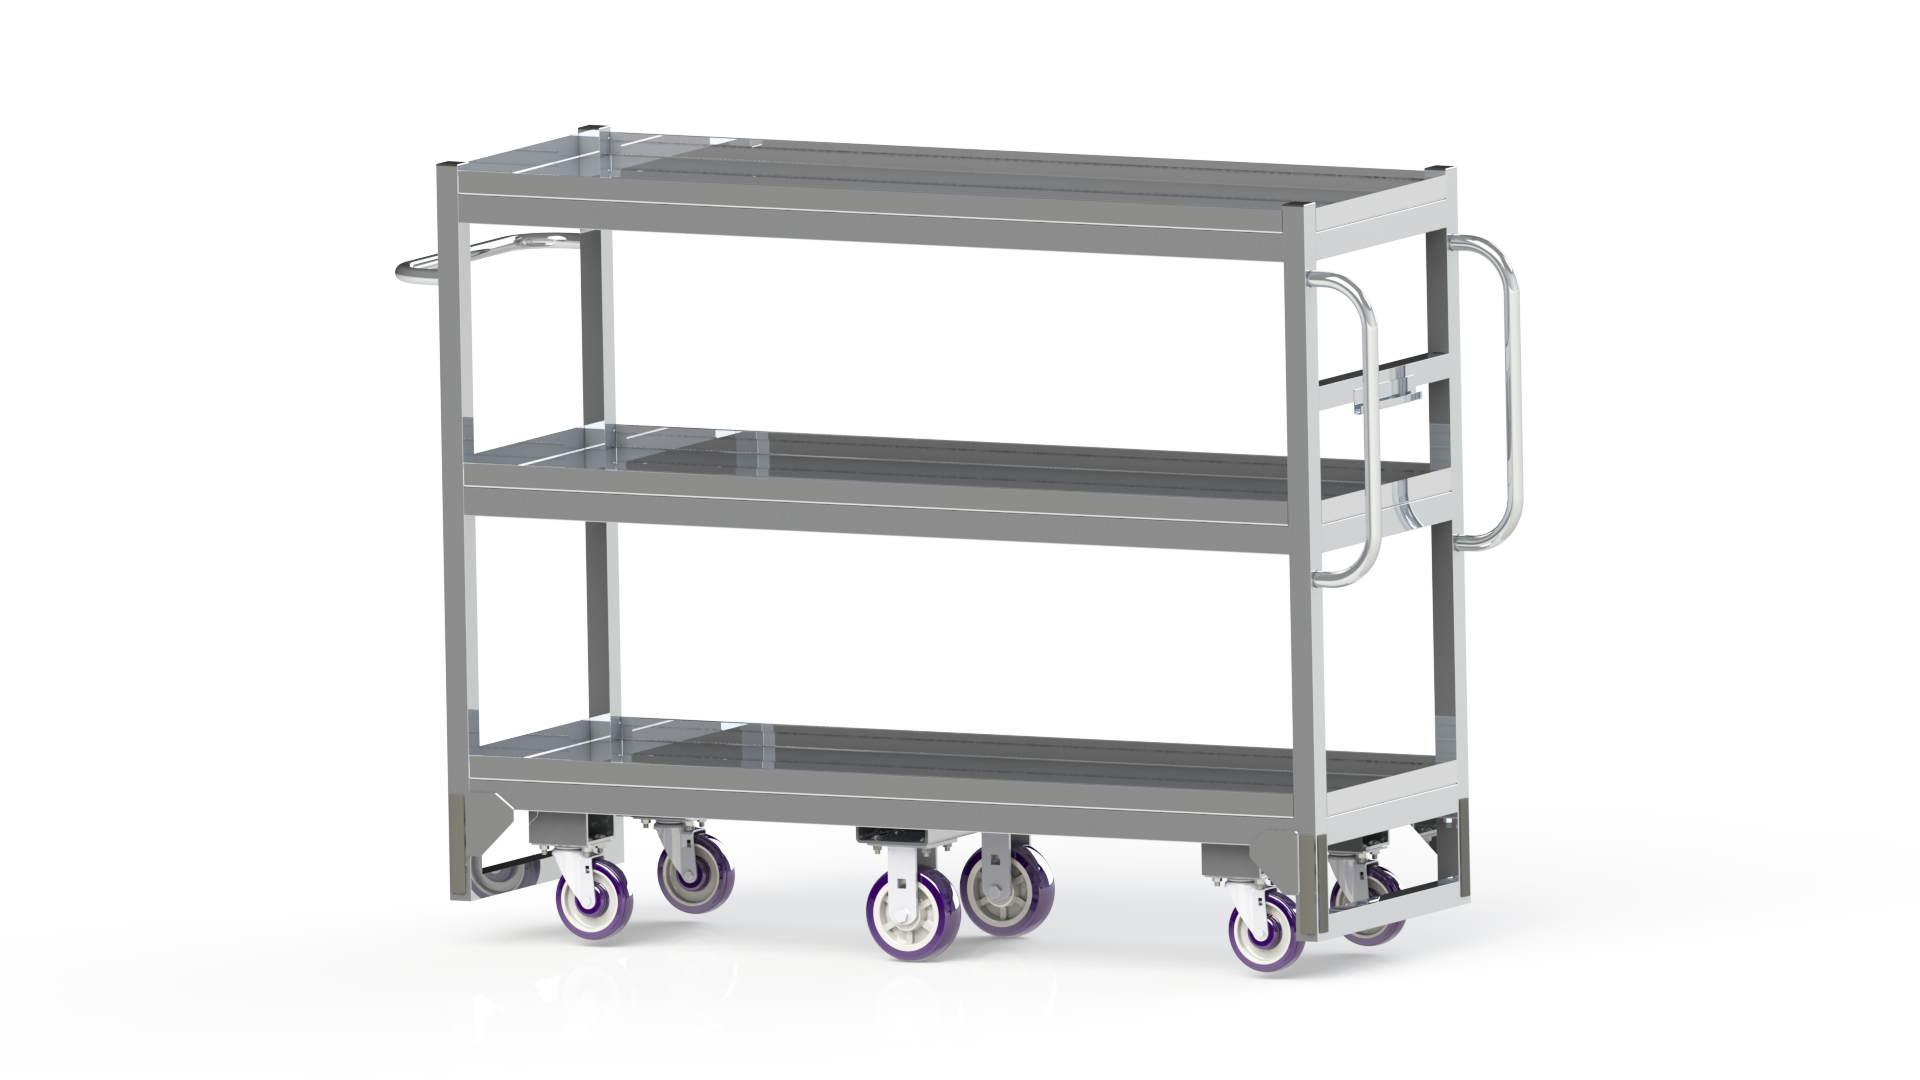 Utility Cart with 3 Shelves picking cart Three Shelf Distribution Cart picking cart 3 shelf picking cart, 3 shelf Picking Cart, picking cart, ecom cart, ecommerce cart, ecommerce picking cart, picking cart,